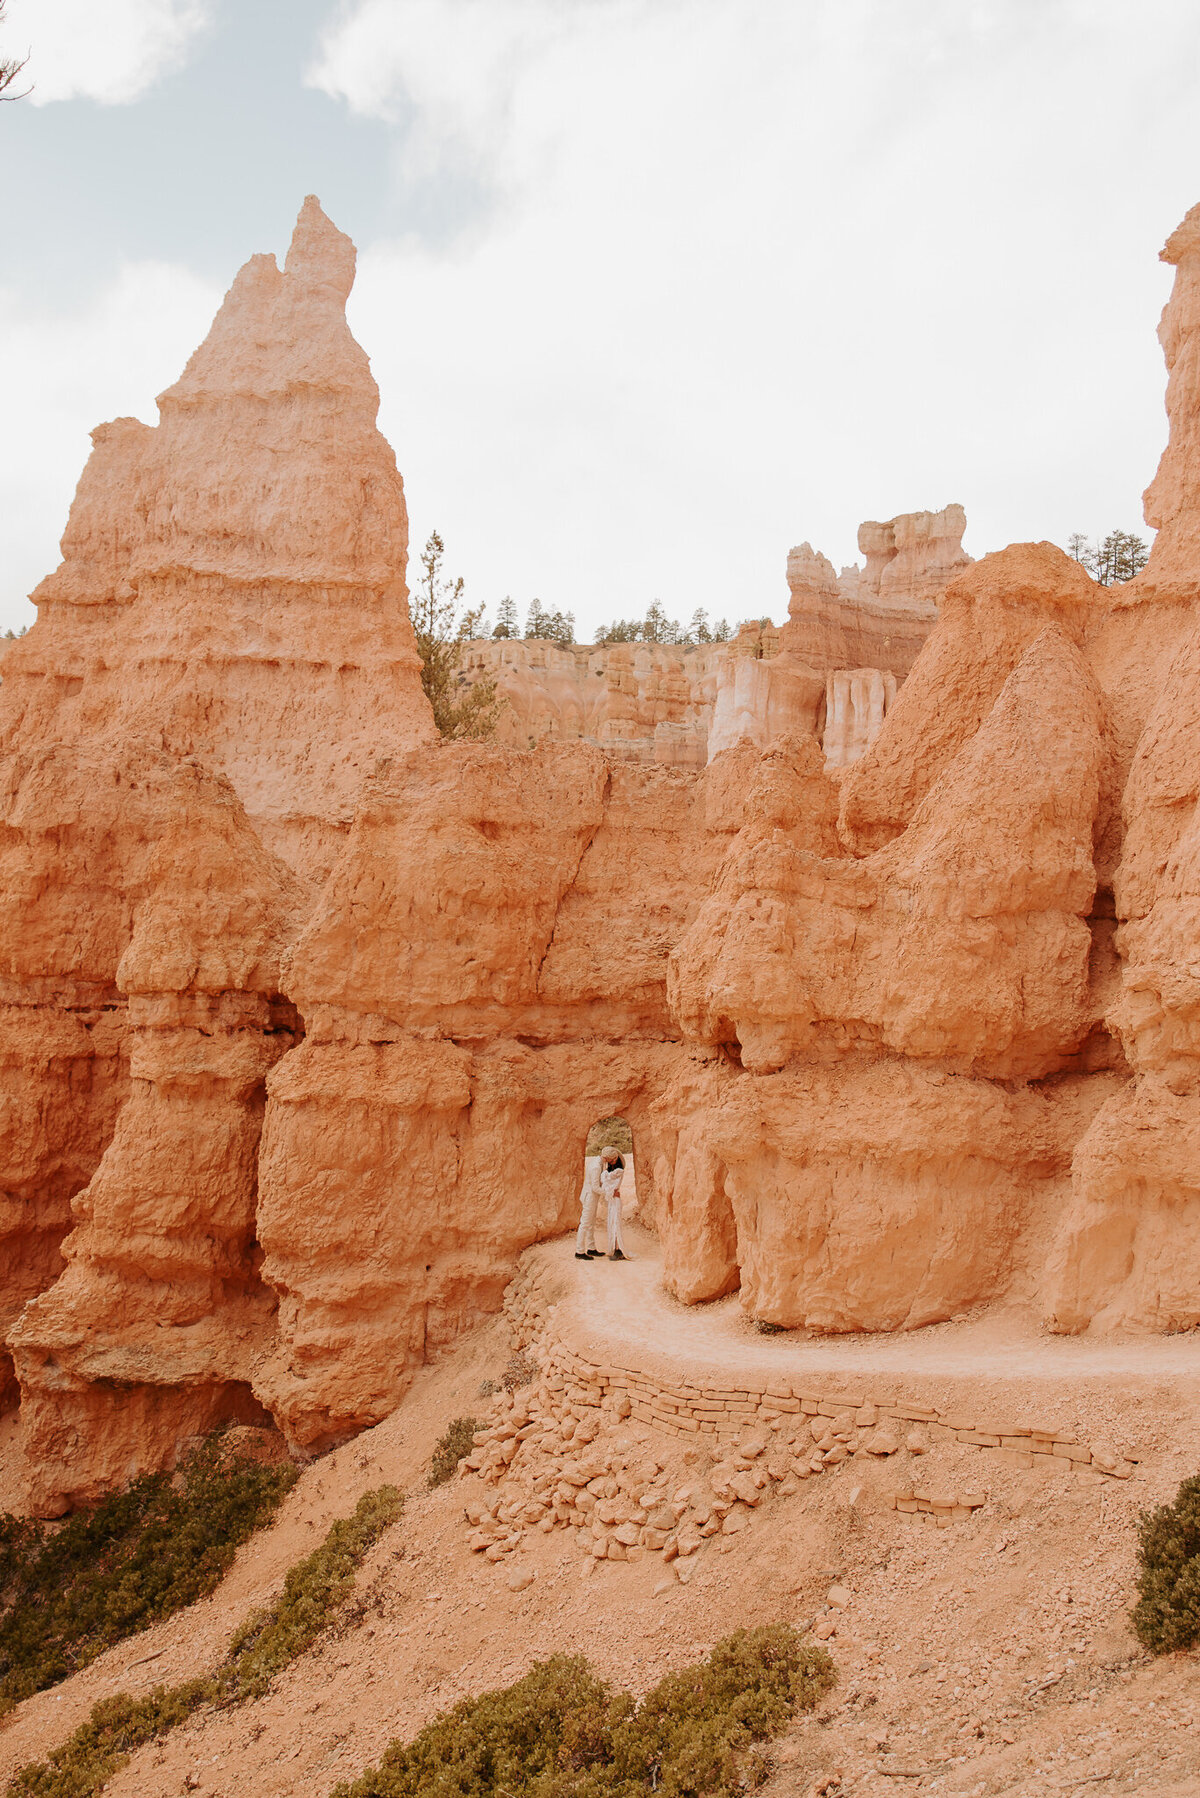 Ceremony in the canyons of Utah within Bryce canyon National Park. Boho and edgy bride and groom portraits.